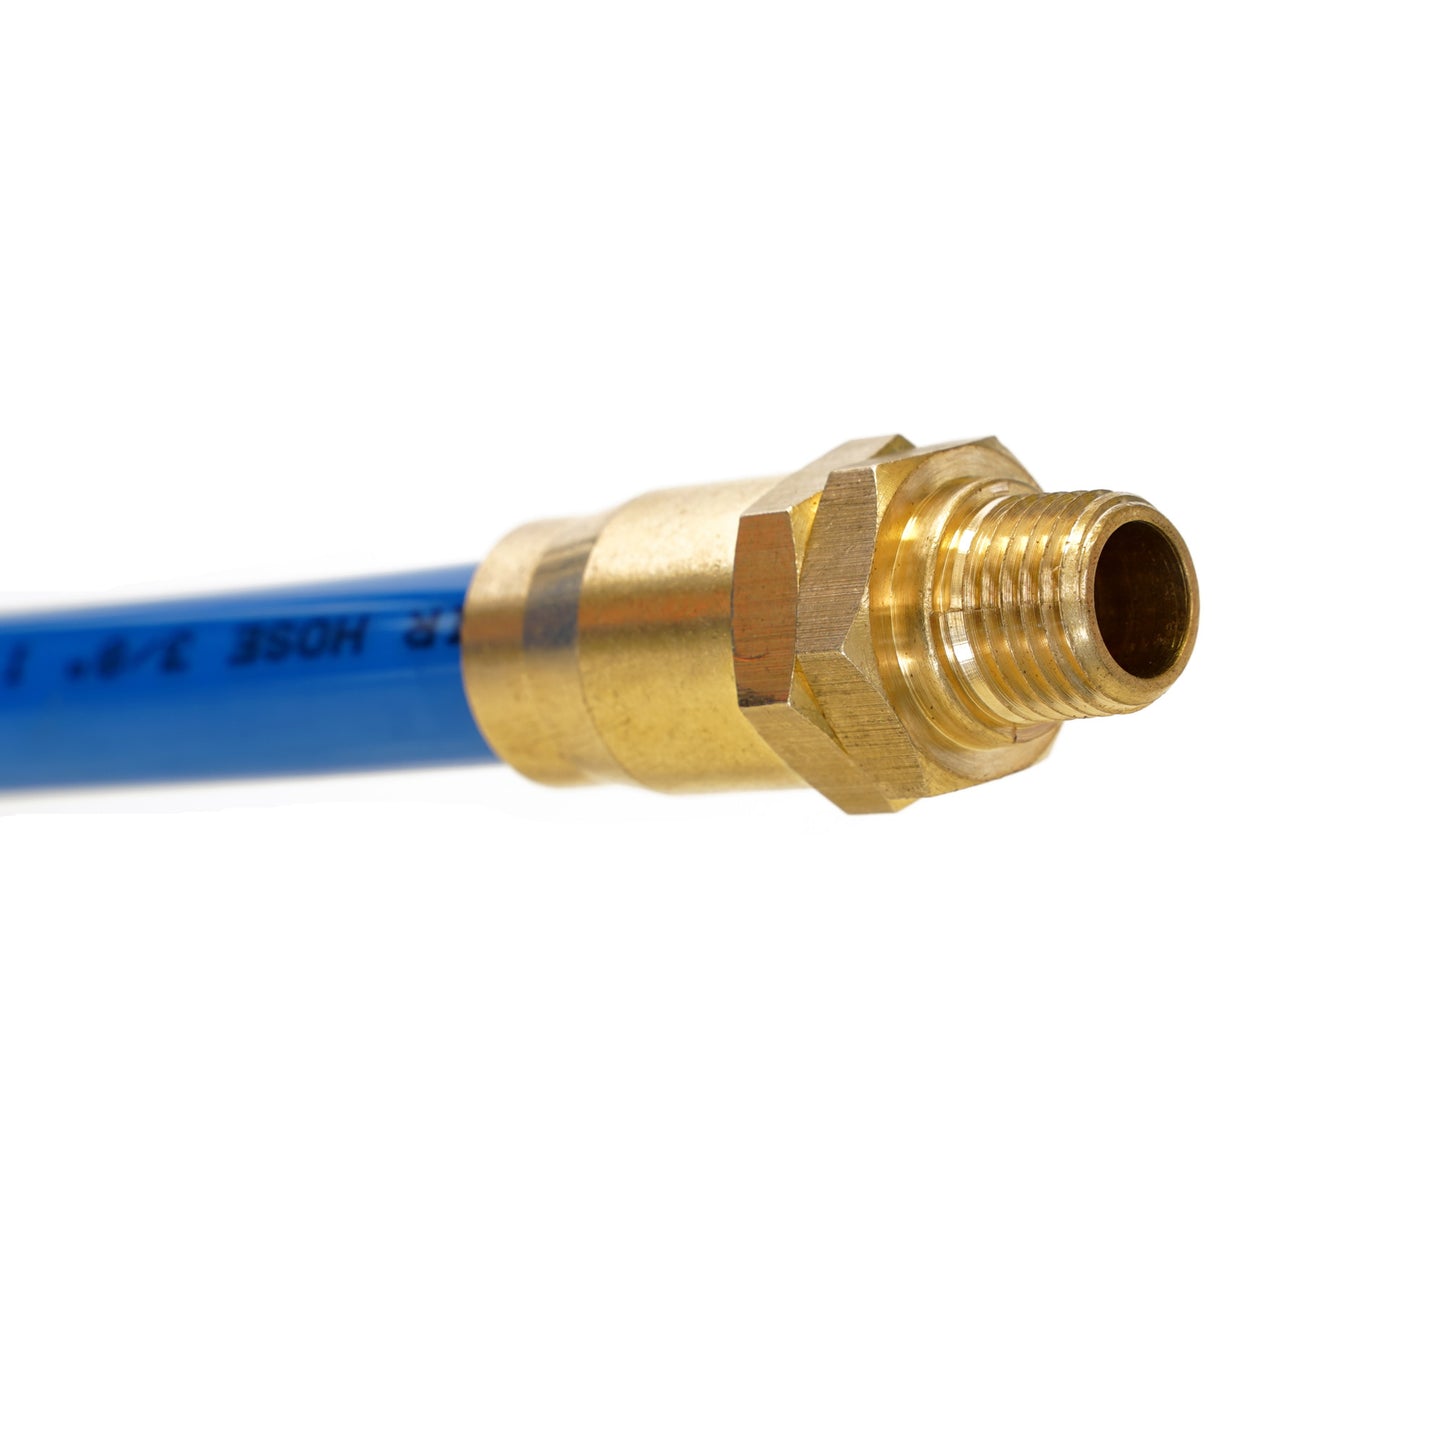 15-Foot Coiled 3/8-Inch ID Air Hose with 1/4-Inch NPT Brass Fittings